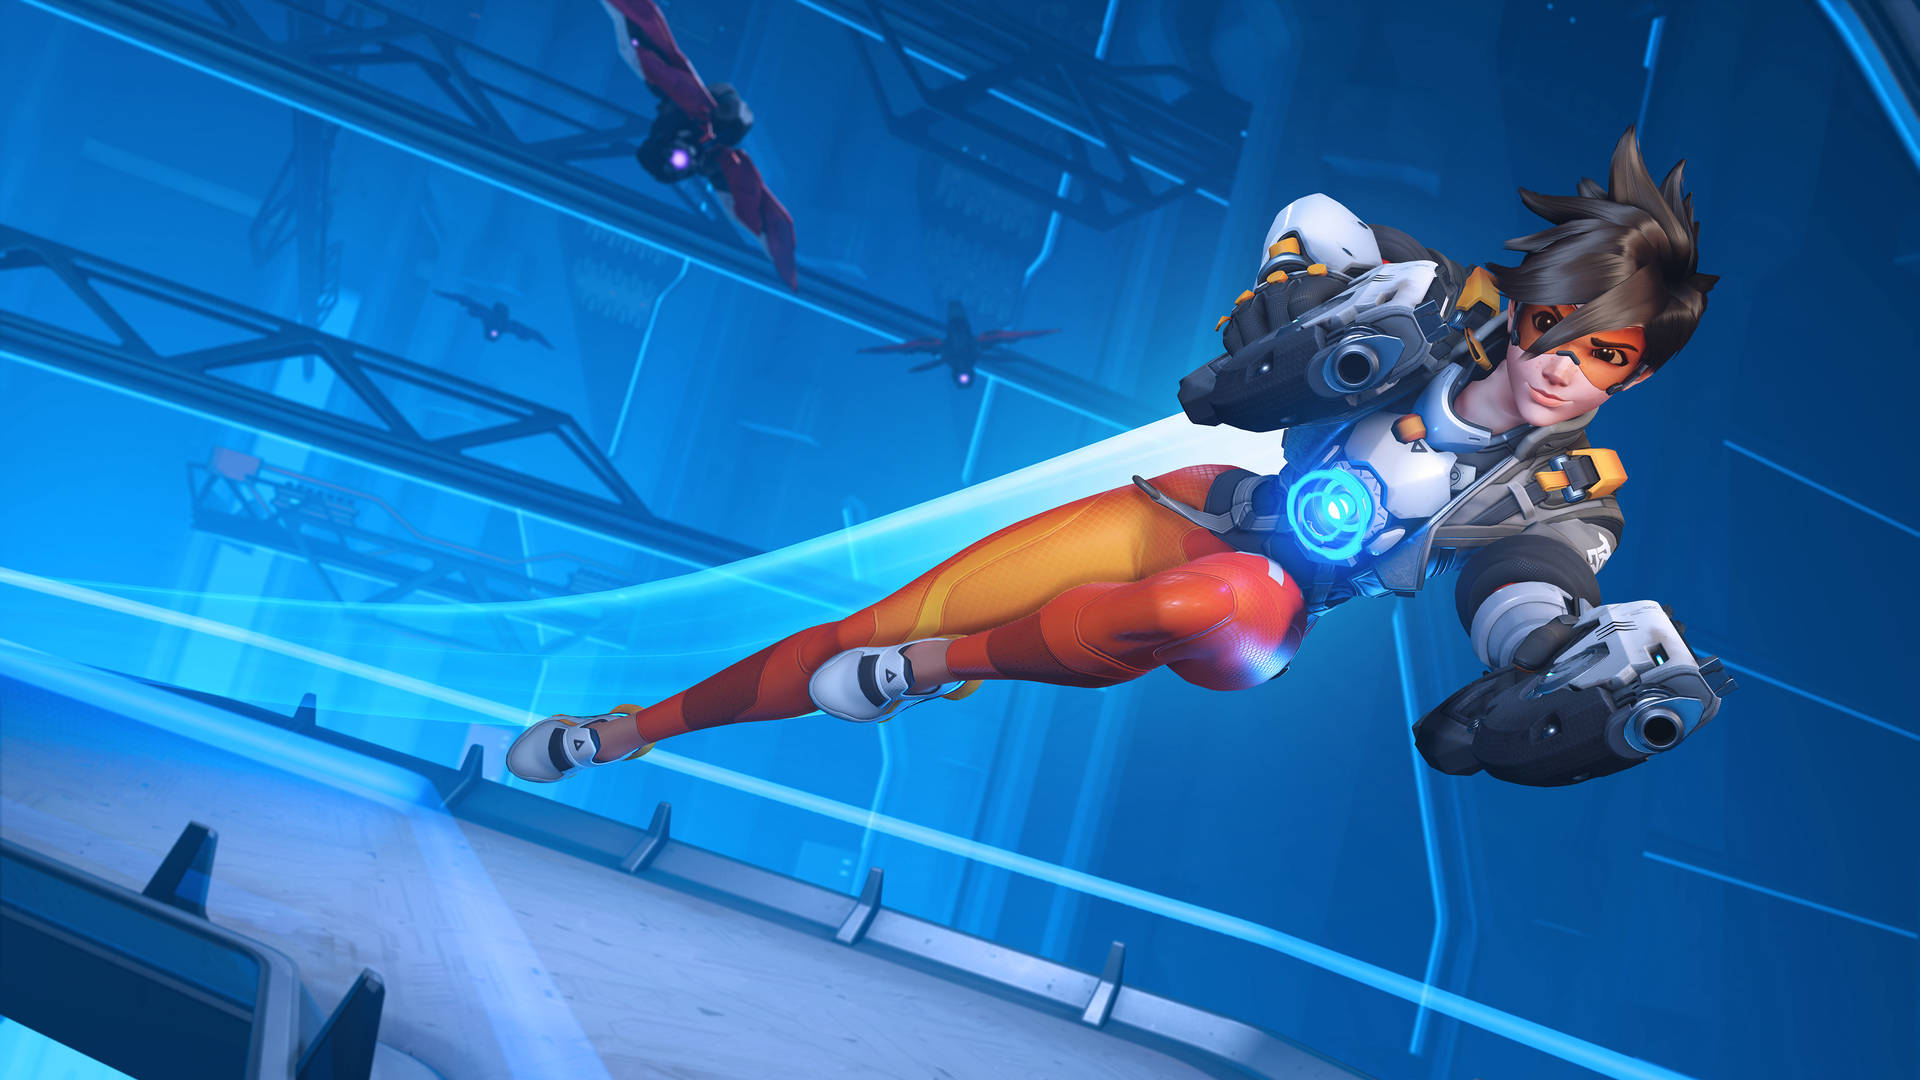 Free Overwatch Wallpaper Downloads, [300+] Overwatch Wallpapers for FREE |  